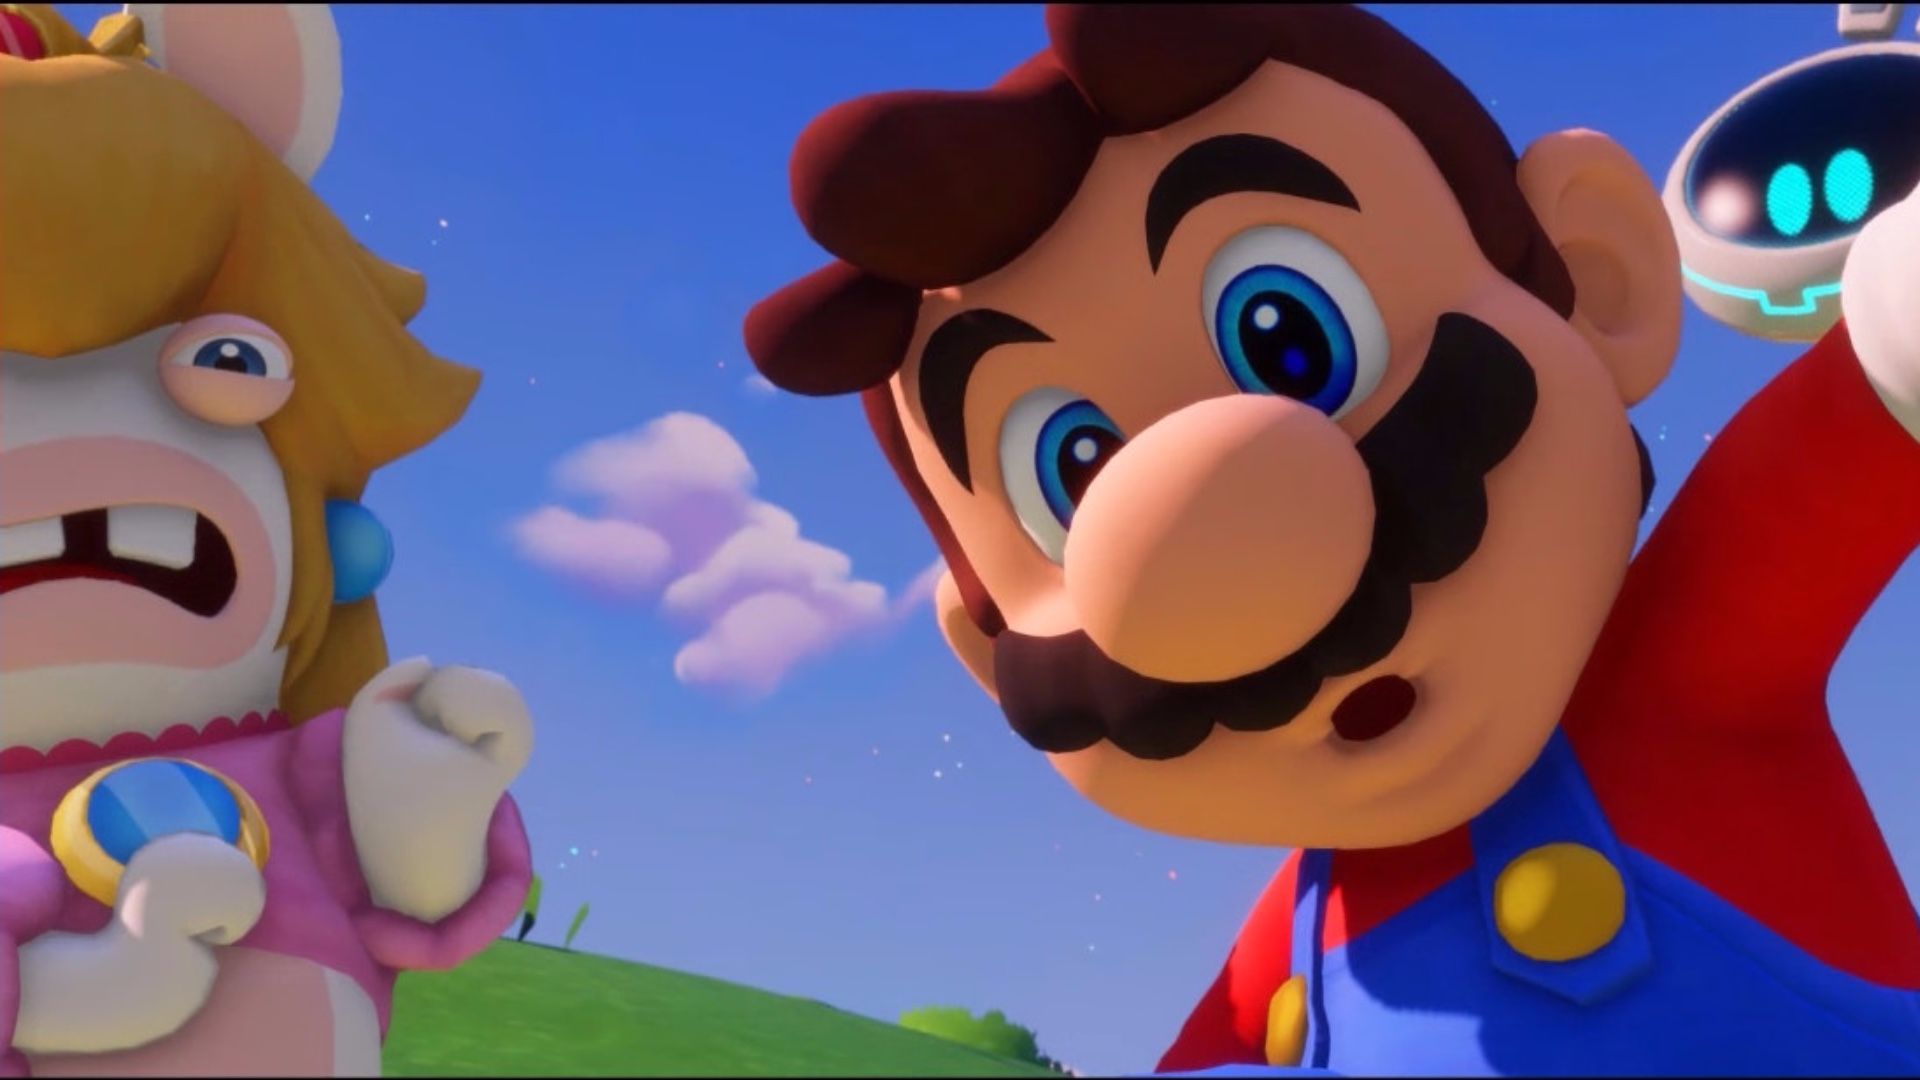 Rabbid Peach and Mario look at the Spark in amazement in Mario + Rabbids